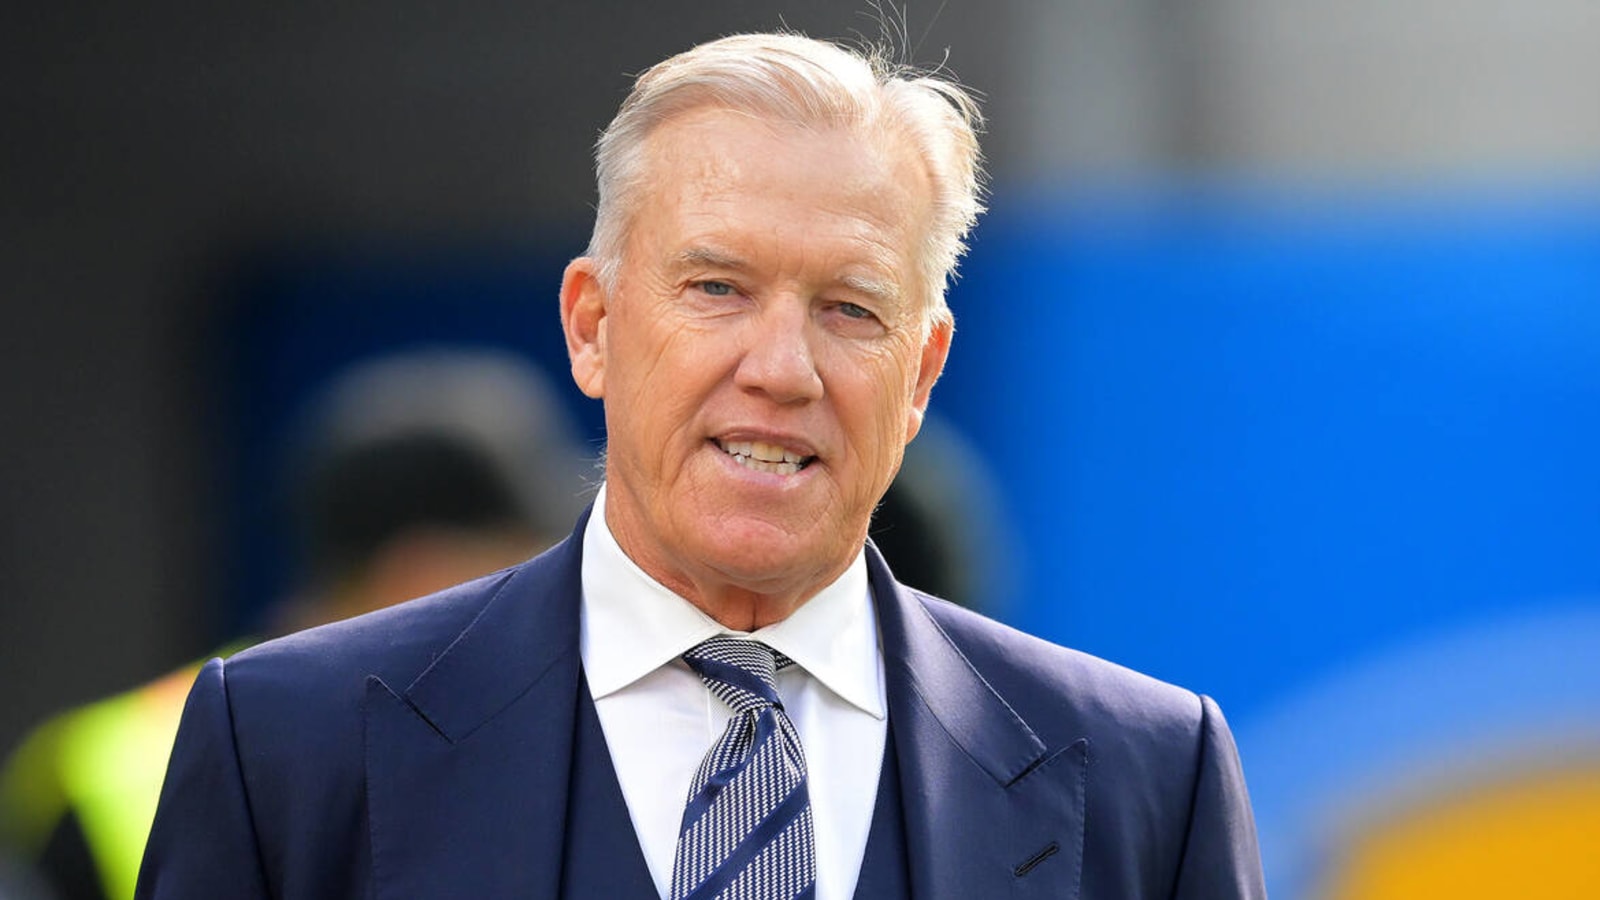 John Elway reportedly has new role with Broncos